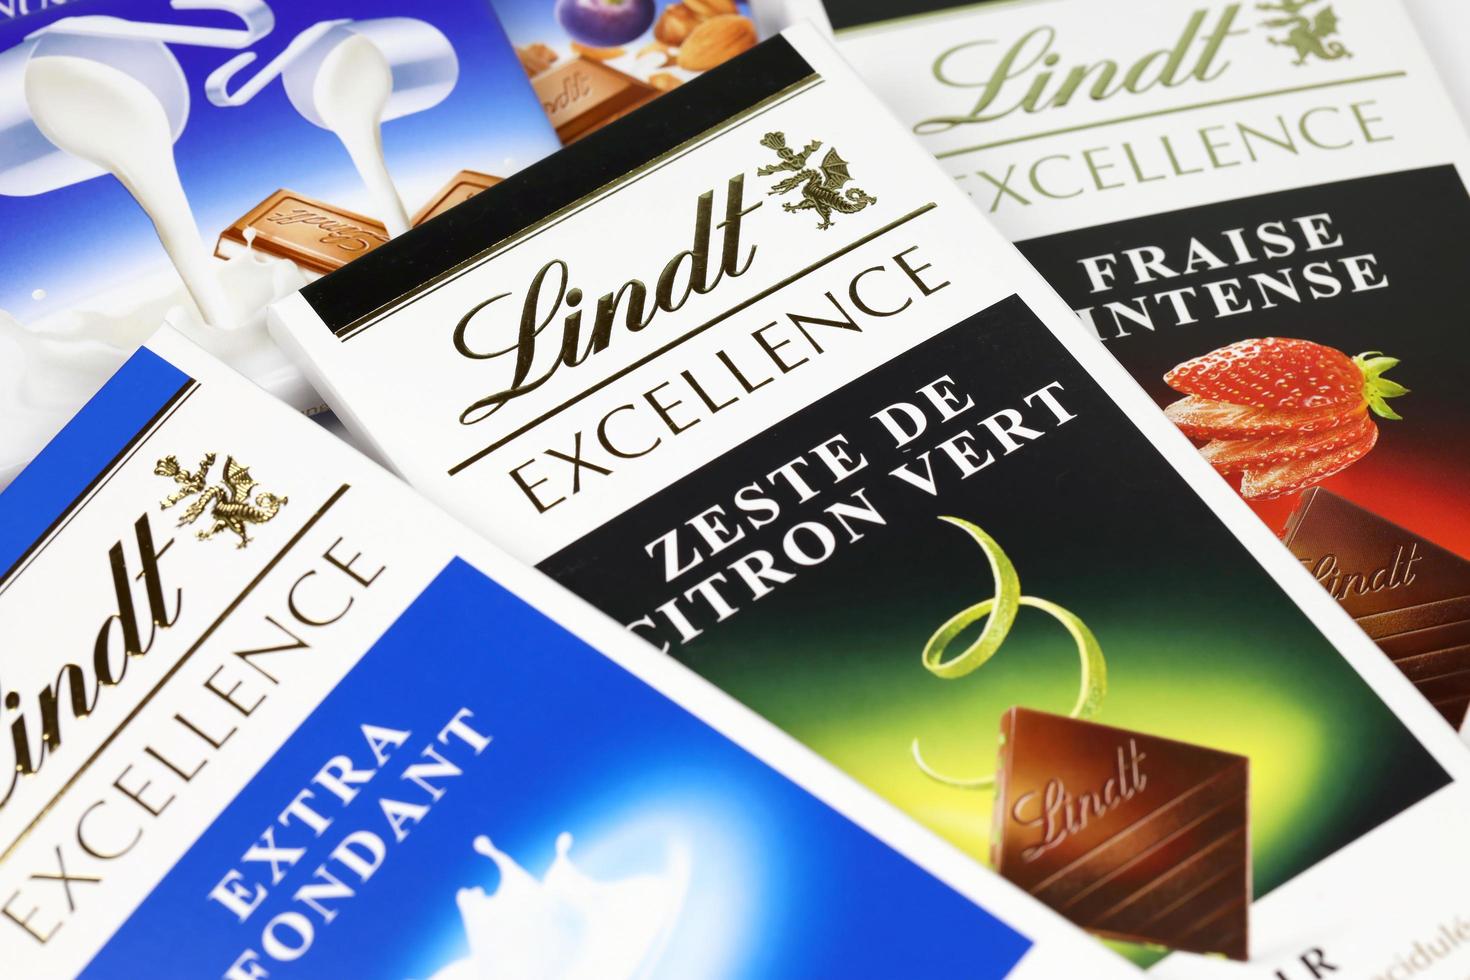 KHARKIV, UKRAINE - DECEMBER 18, 2022 Lindt Chocolate on white background. Lindt and Spruengli AG is a Swiss chocolatier and confectionery company known for their chocolate bars photo